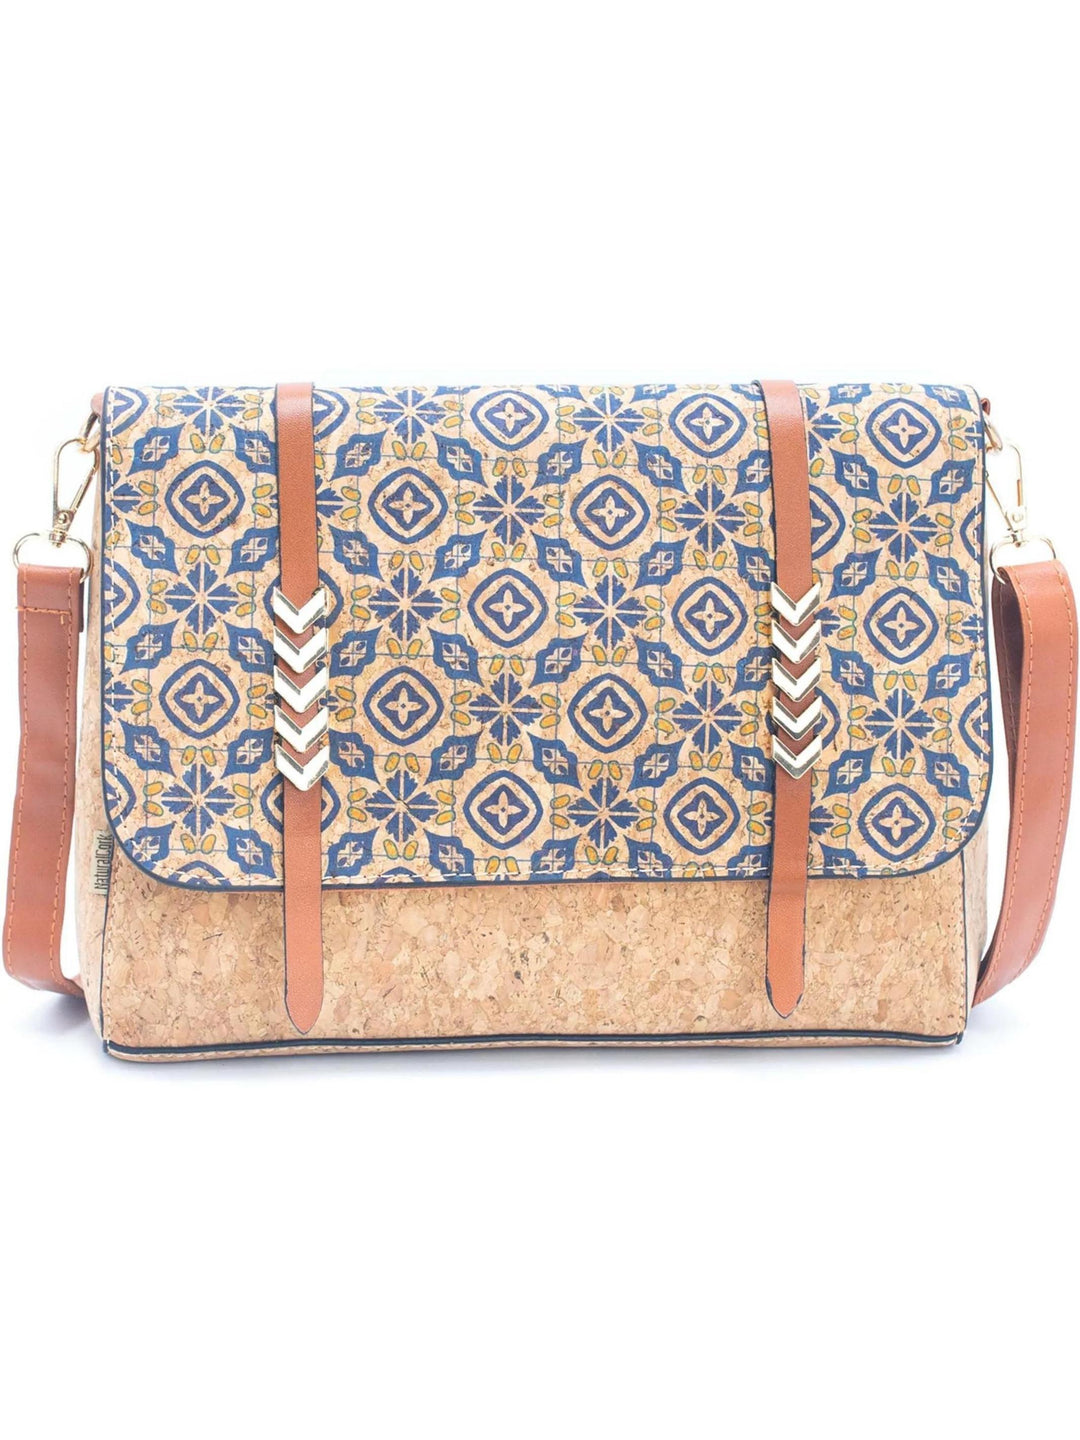 Buy Handicrafted Fabric and Vegan Leather Sling Bags for Women